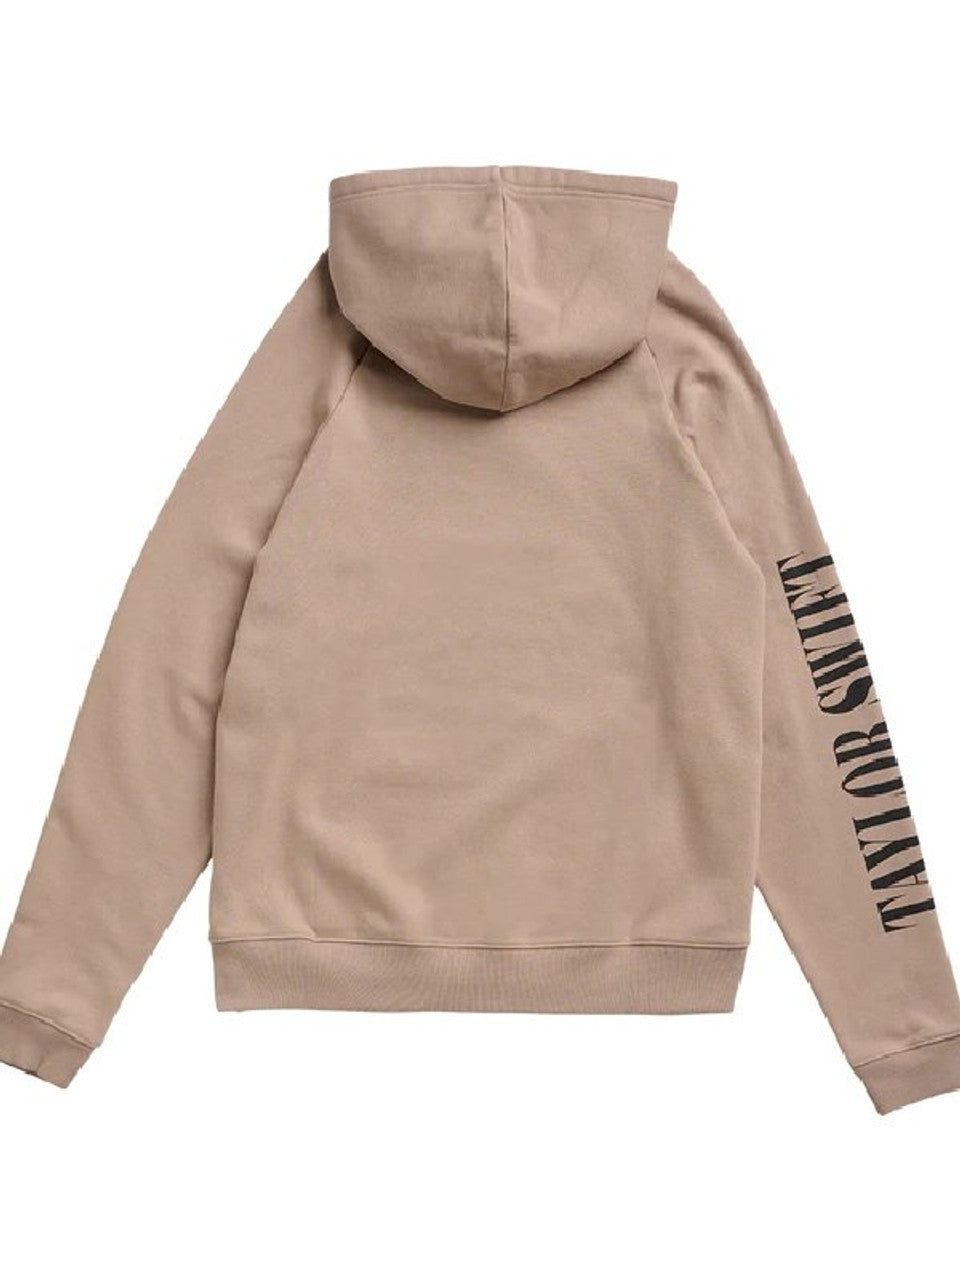 The Eras Tour Taylor Swift Taupe Pullover Hoodie